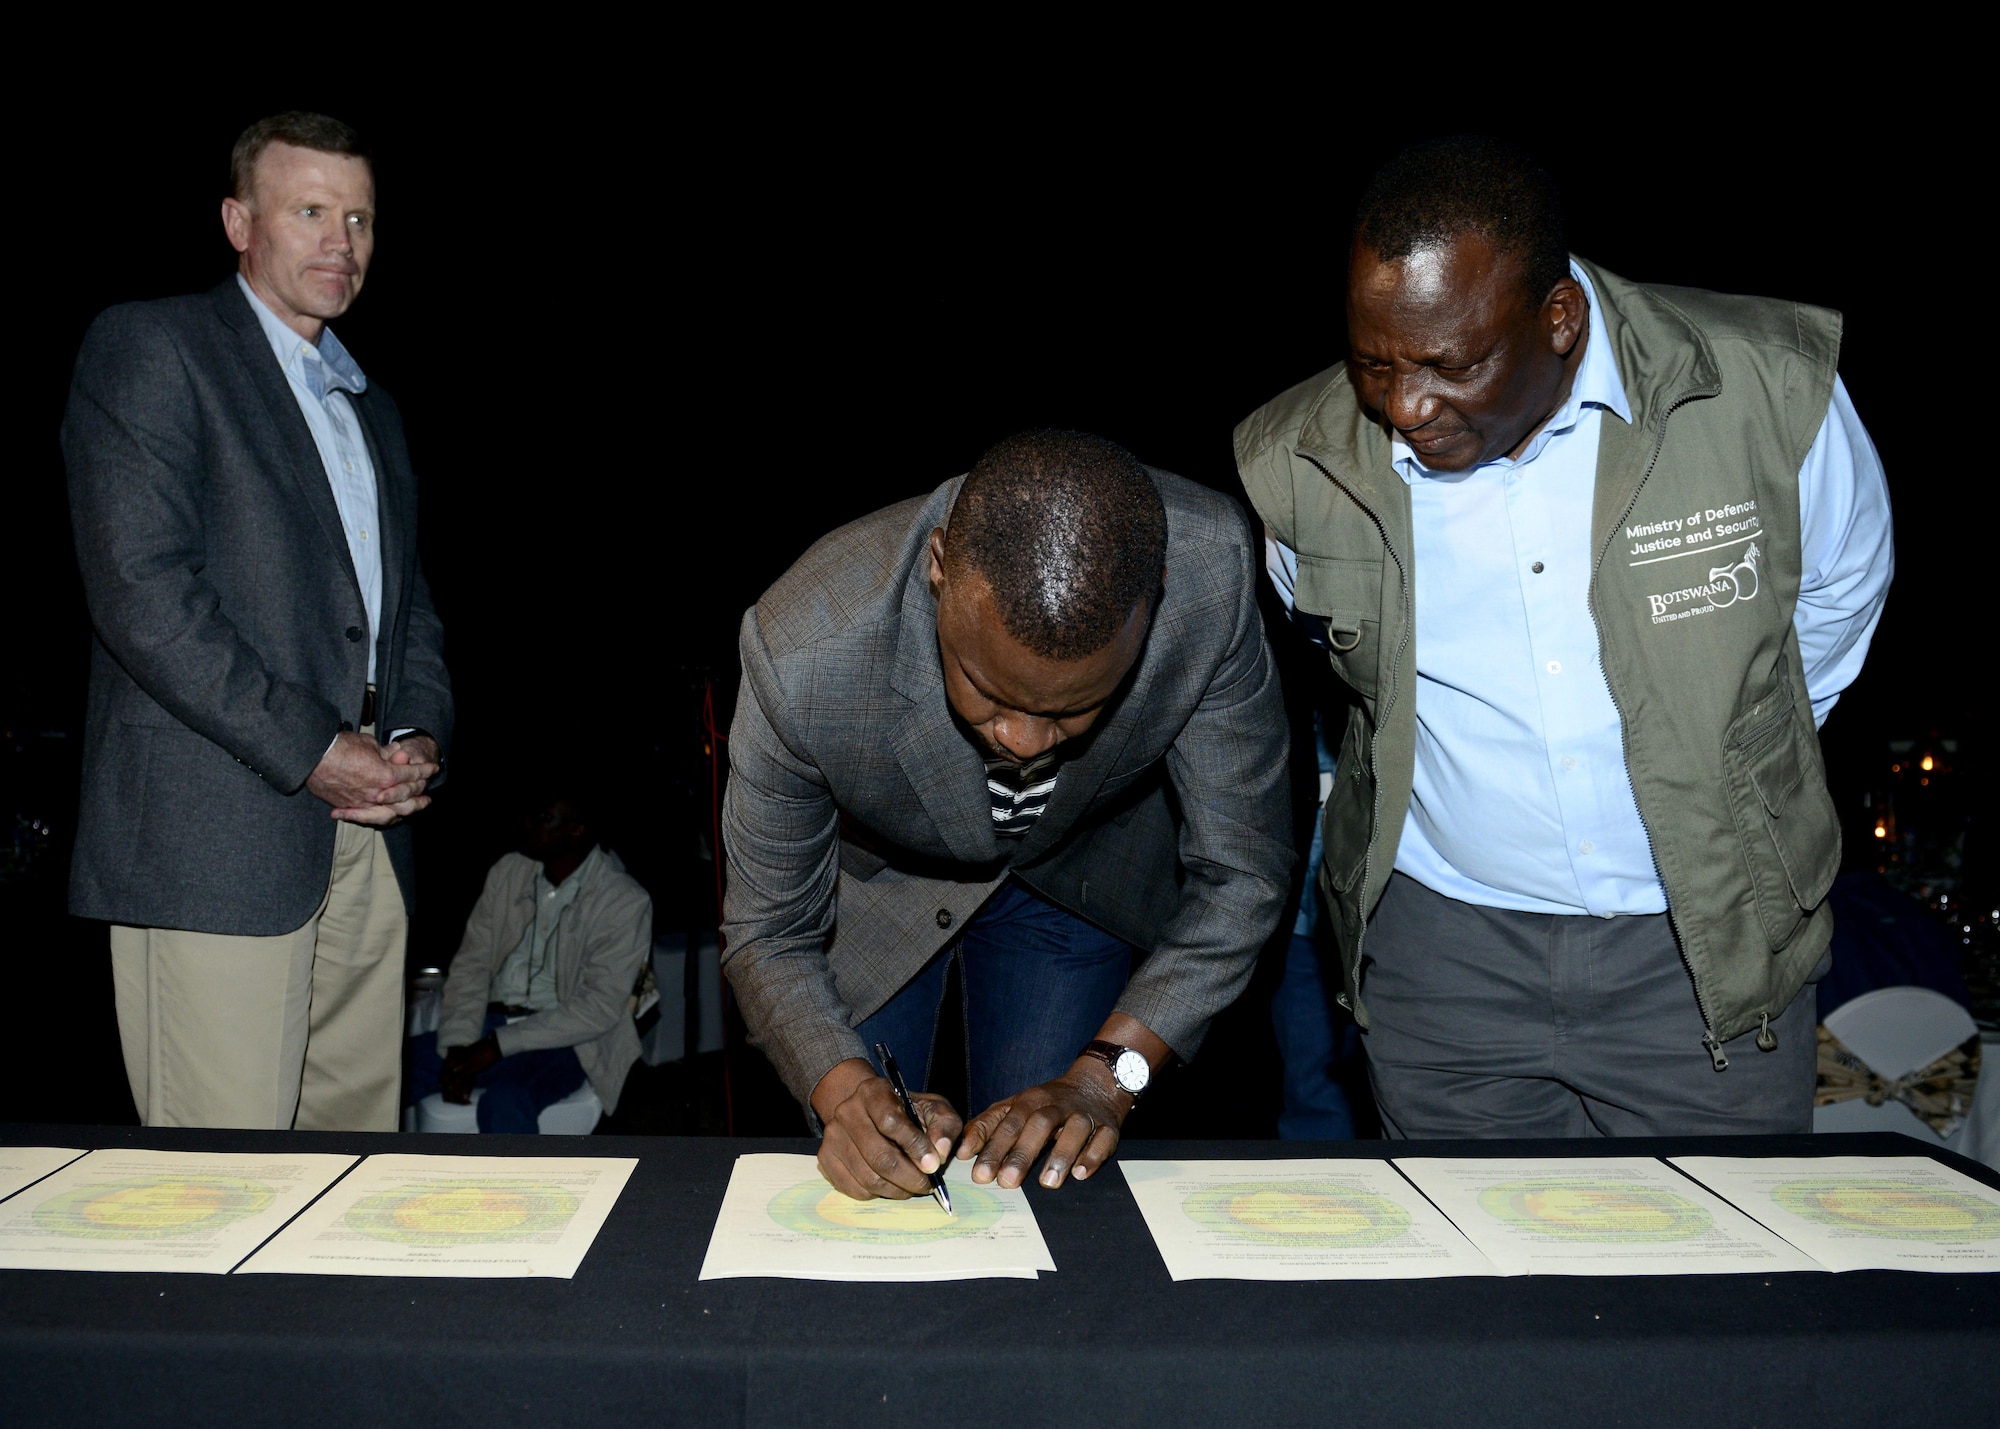 Gen. Tod D. Wolters, U.S. Air Forces in Europe and Africa commander, and Maj. Gen. Innocent S. Phatshwana, Botswana Defense Force Air Arm commander, facilitate a signing of the Association of African Air Chiefs Charter during the closing ceremony of the 2017 African Air Chiefs Symposium in Kasane, Botswana on May 17, 2017. The charter encourages members to seek opportunities to cooperate and collaborate to improve and support air operations across Africa. (U.S. Air Force photo by Staff Sgt. Krystal Ardrey)